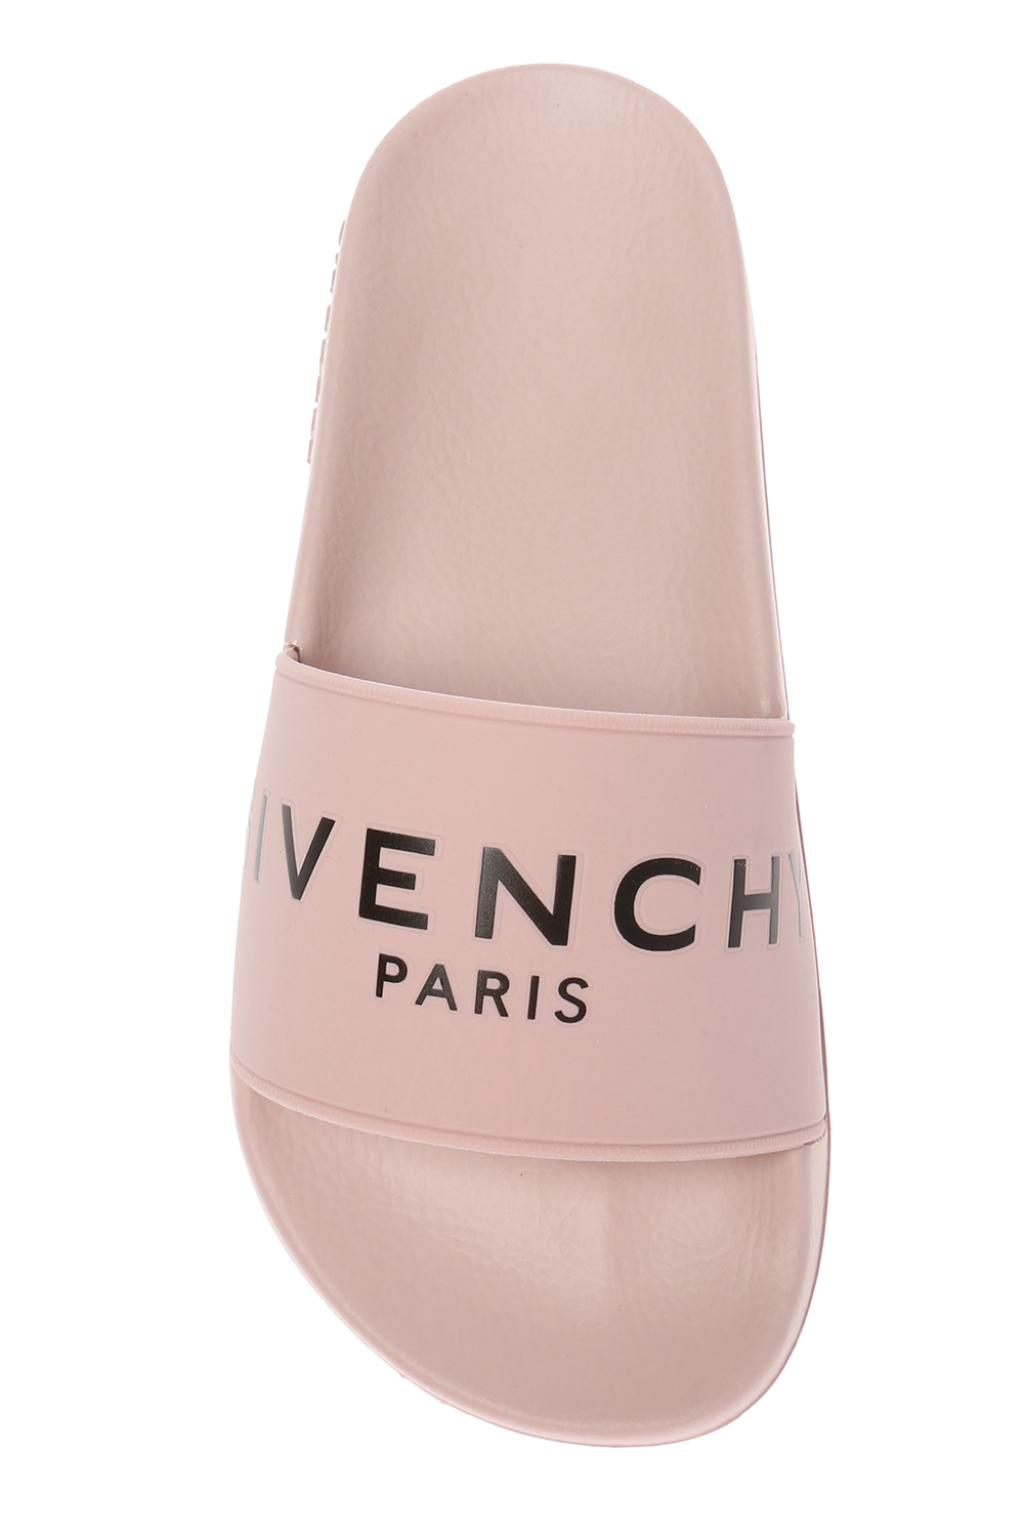 givenchy slippers pink